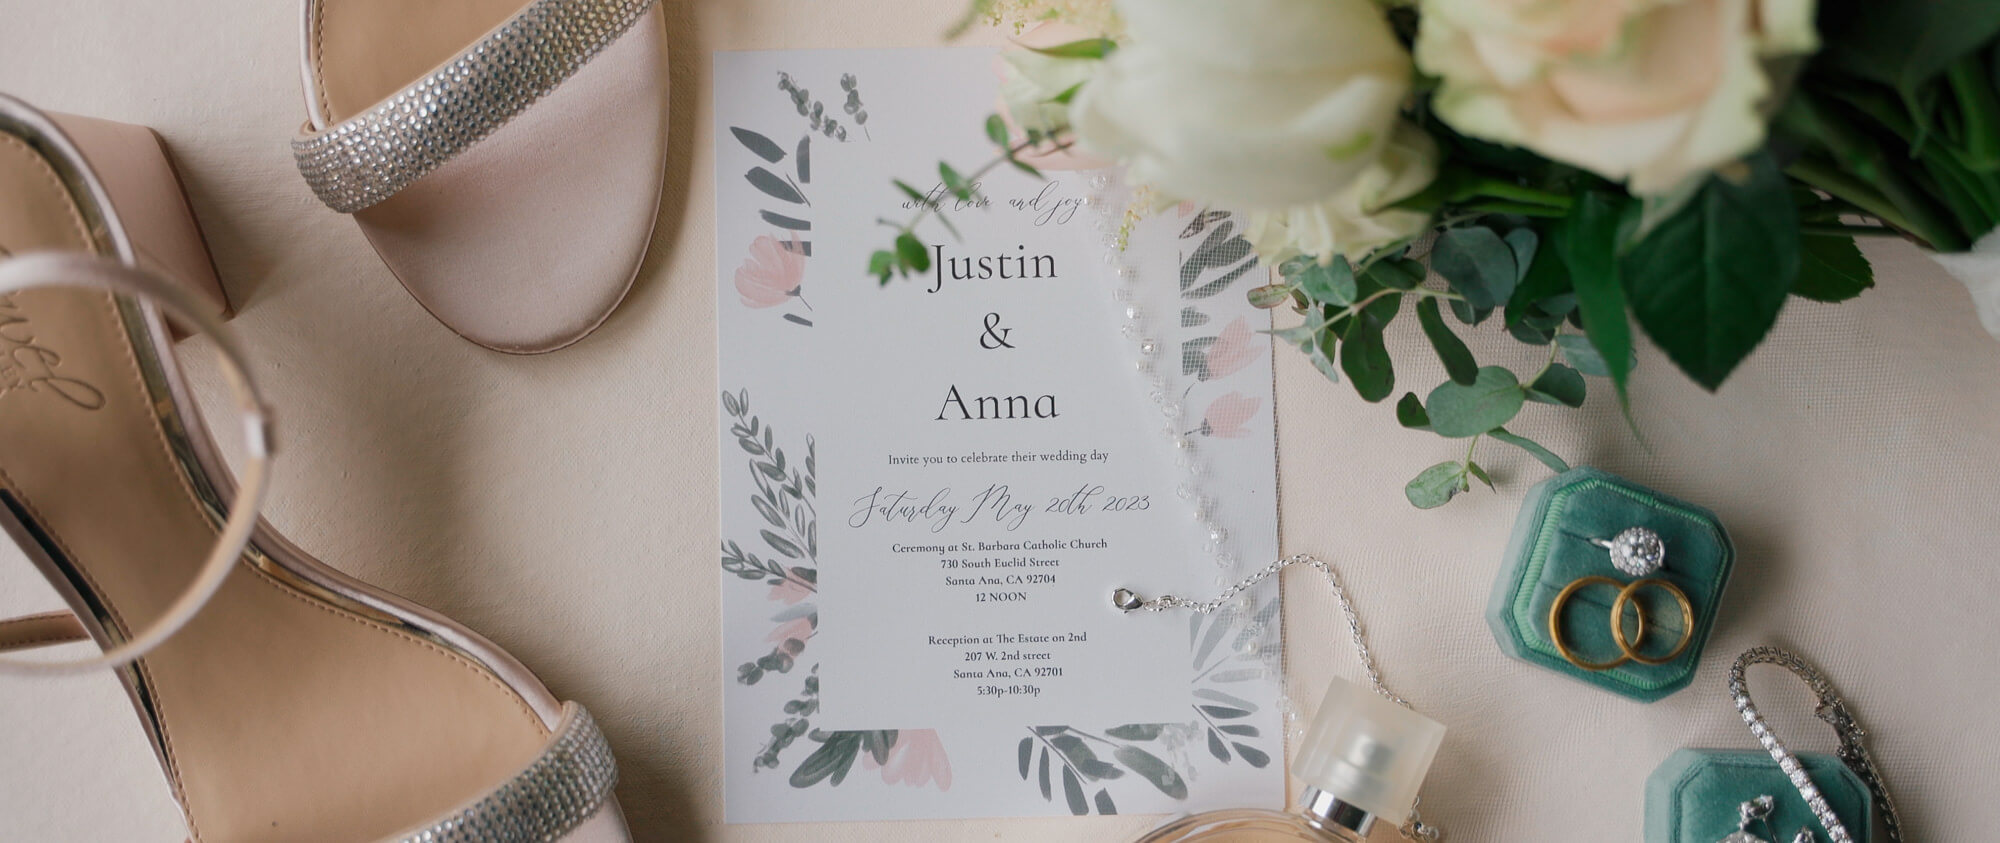 Anna & Justin | 8 Kinds of Smiles